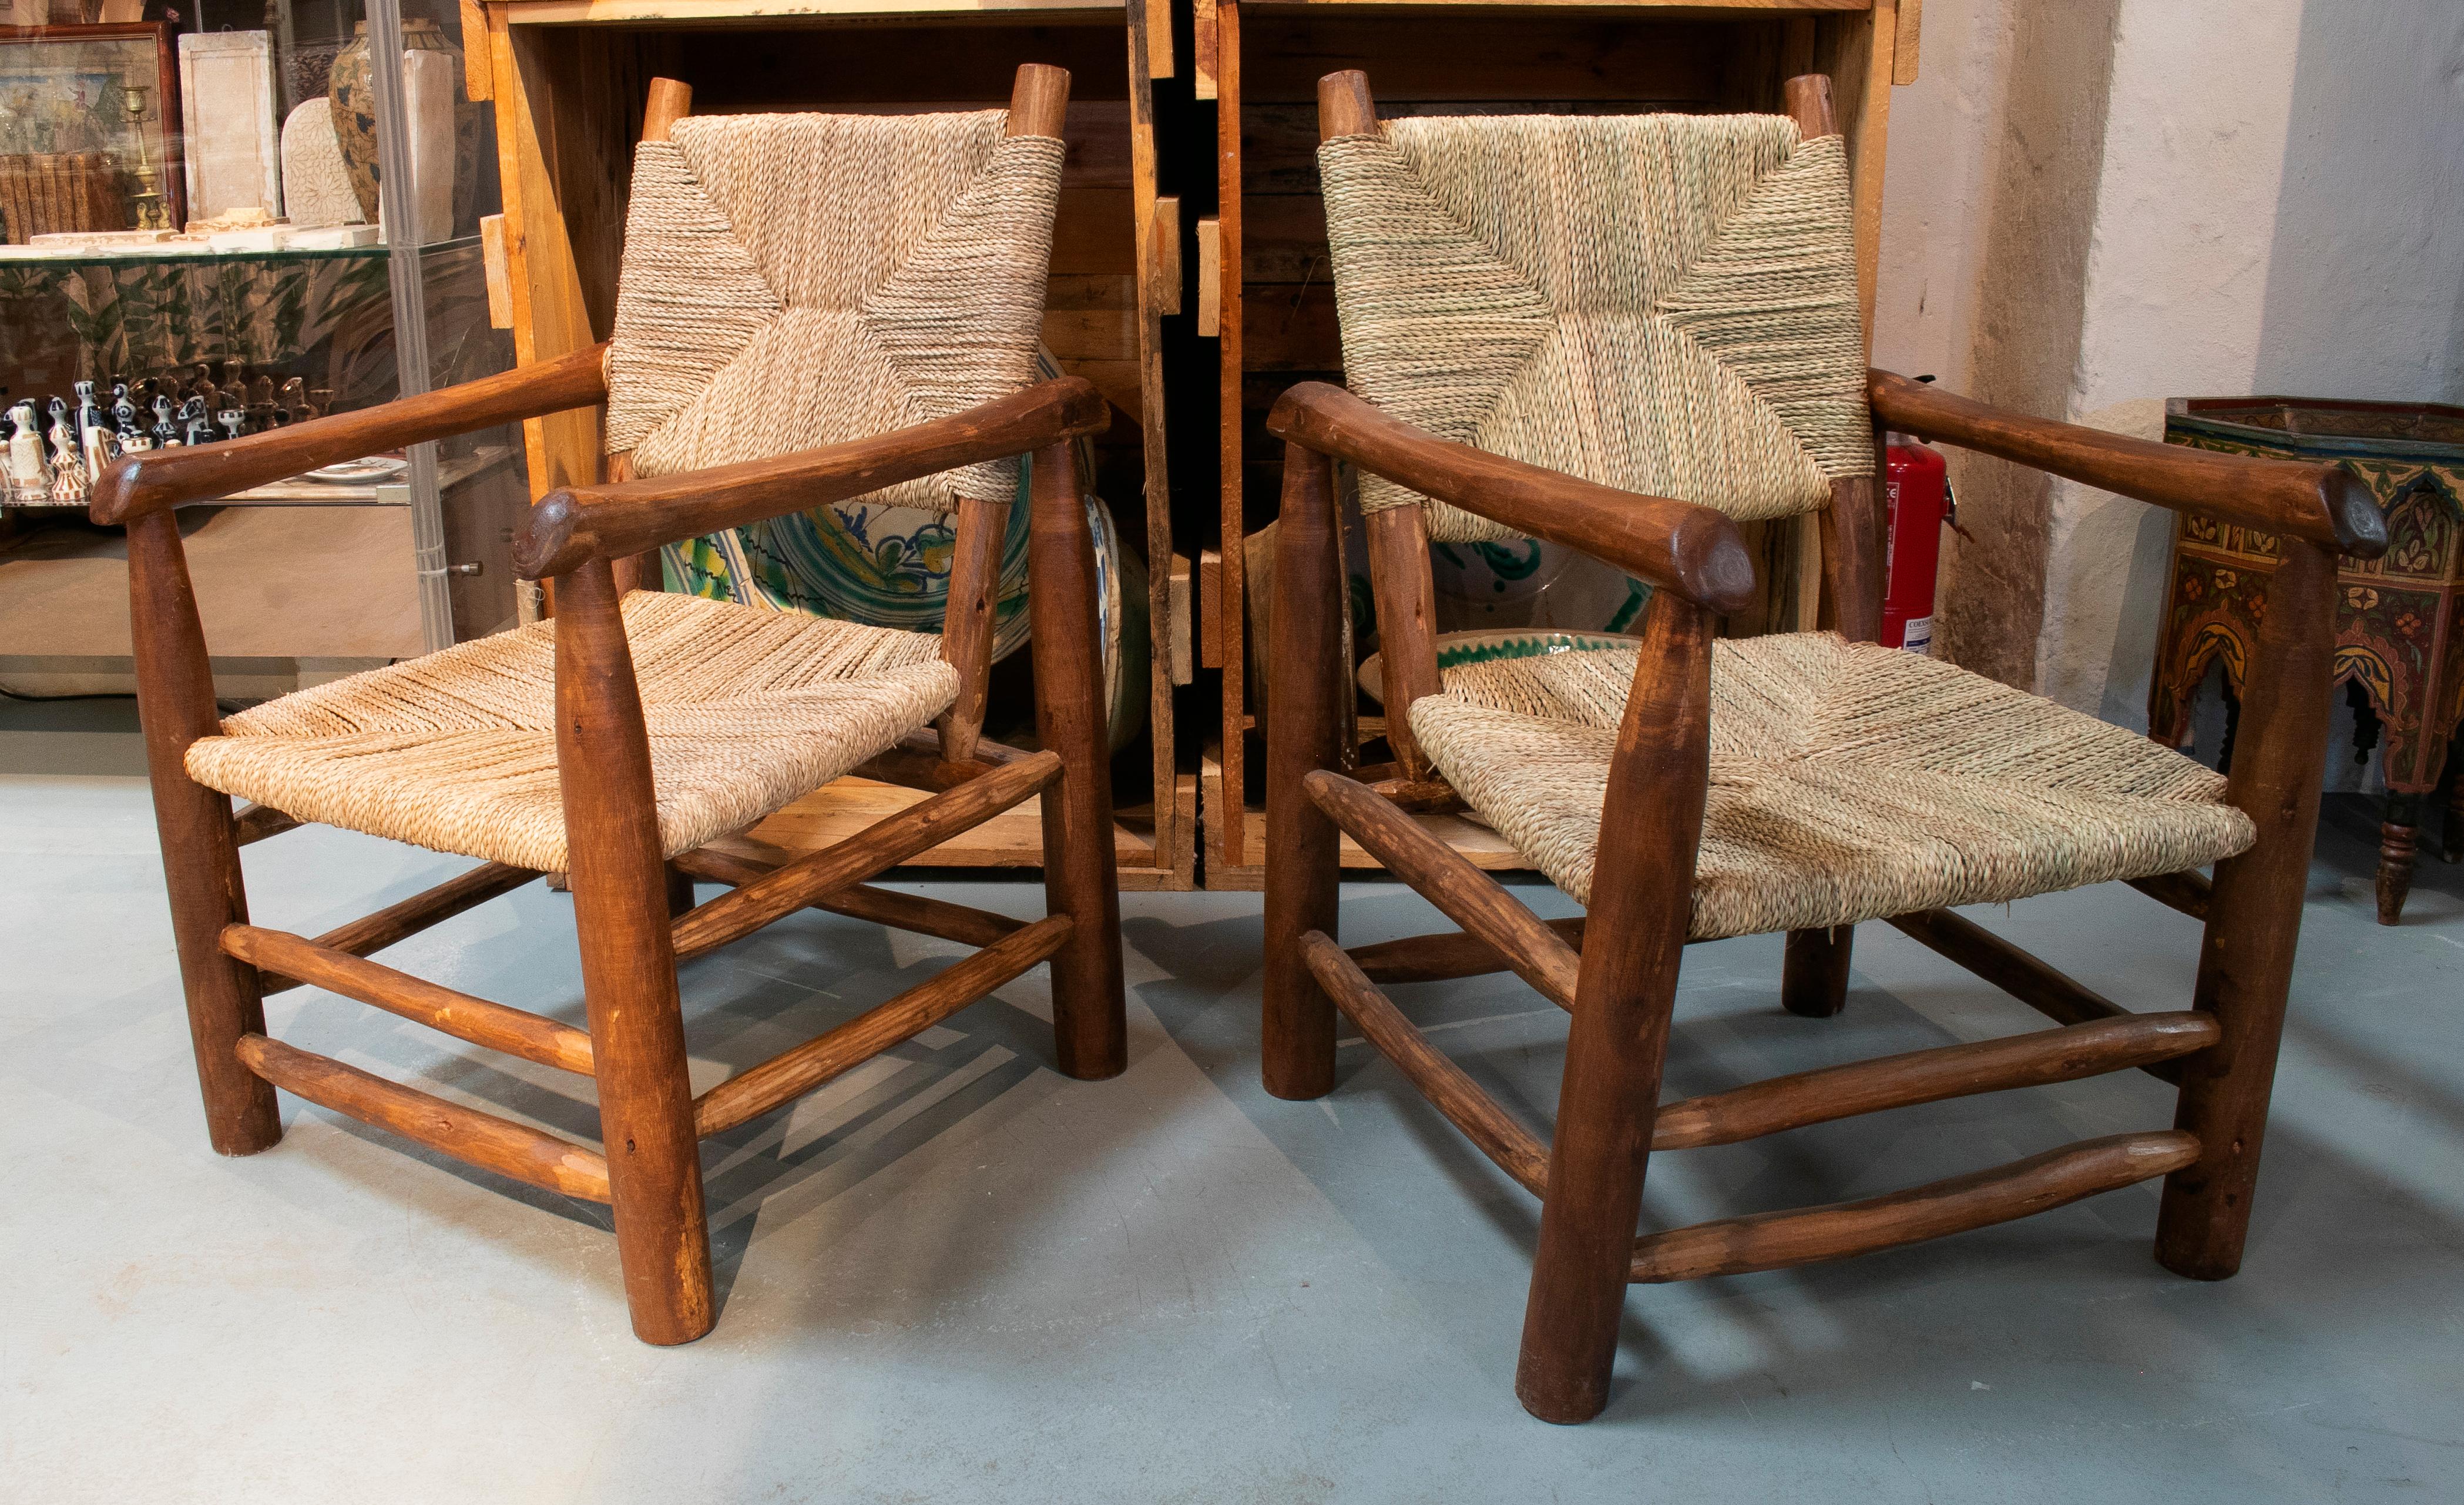 Pair of handmade light brown wooden armchairs with string rope back and seat.